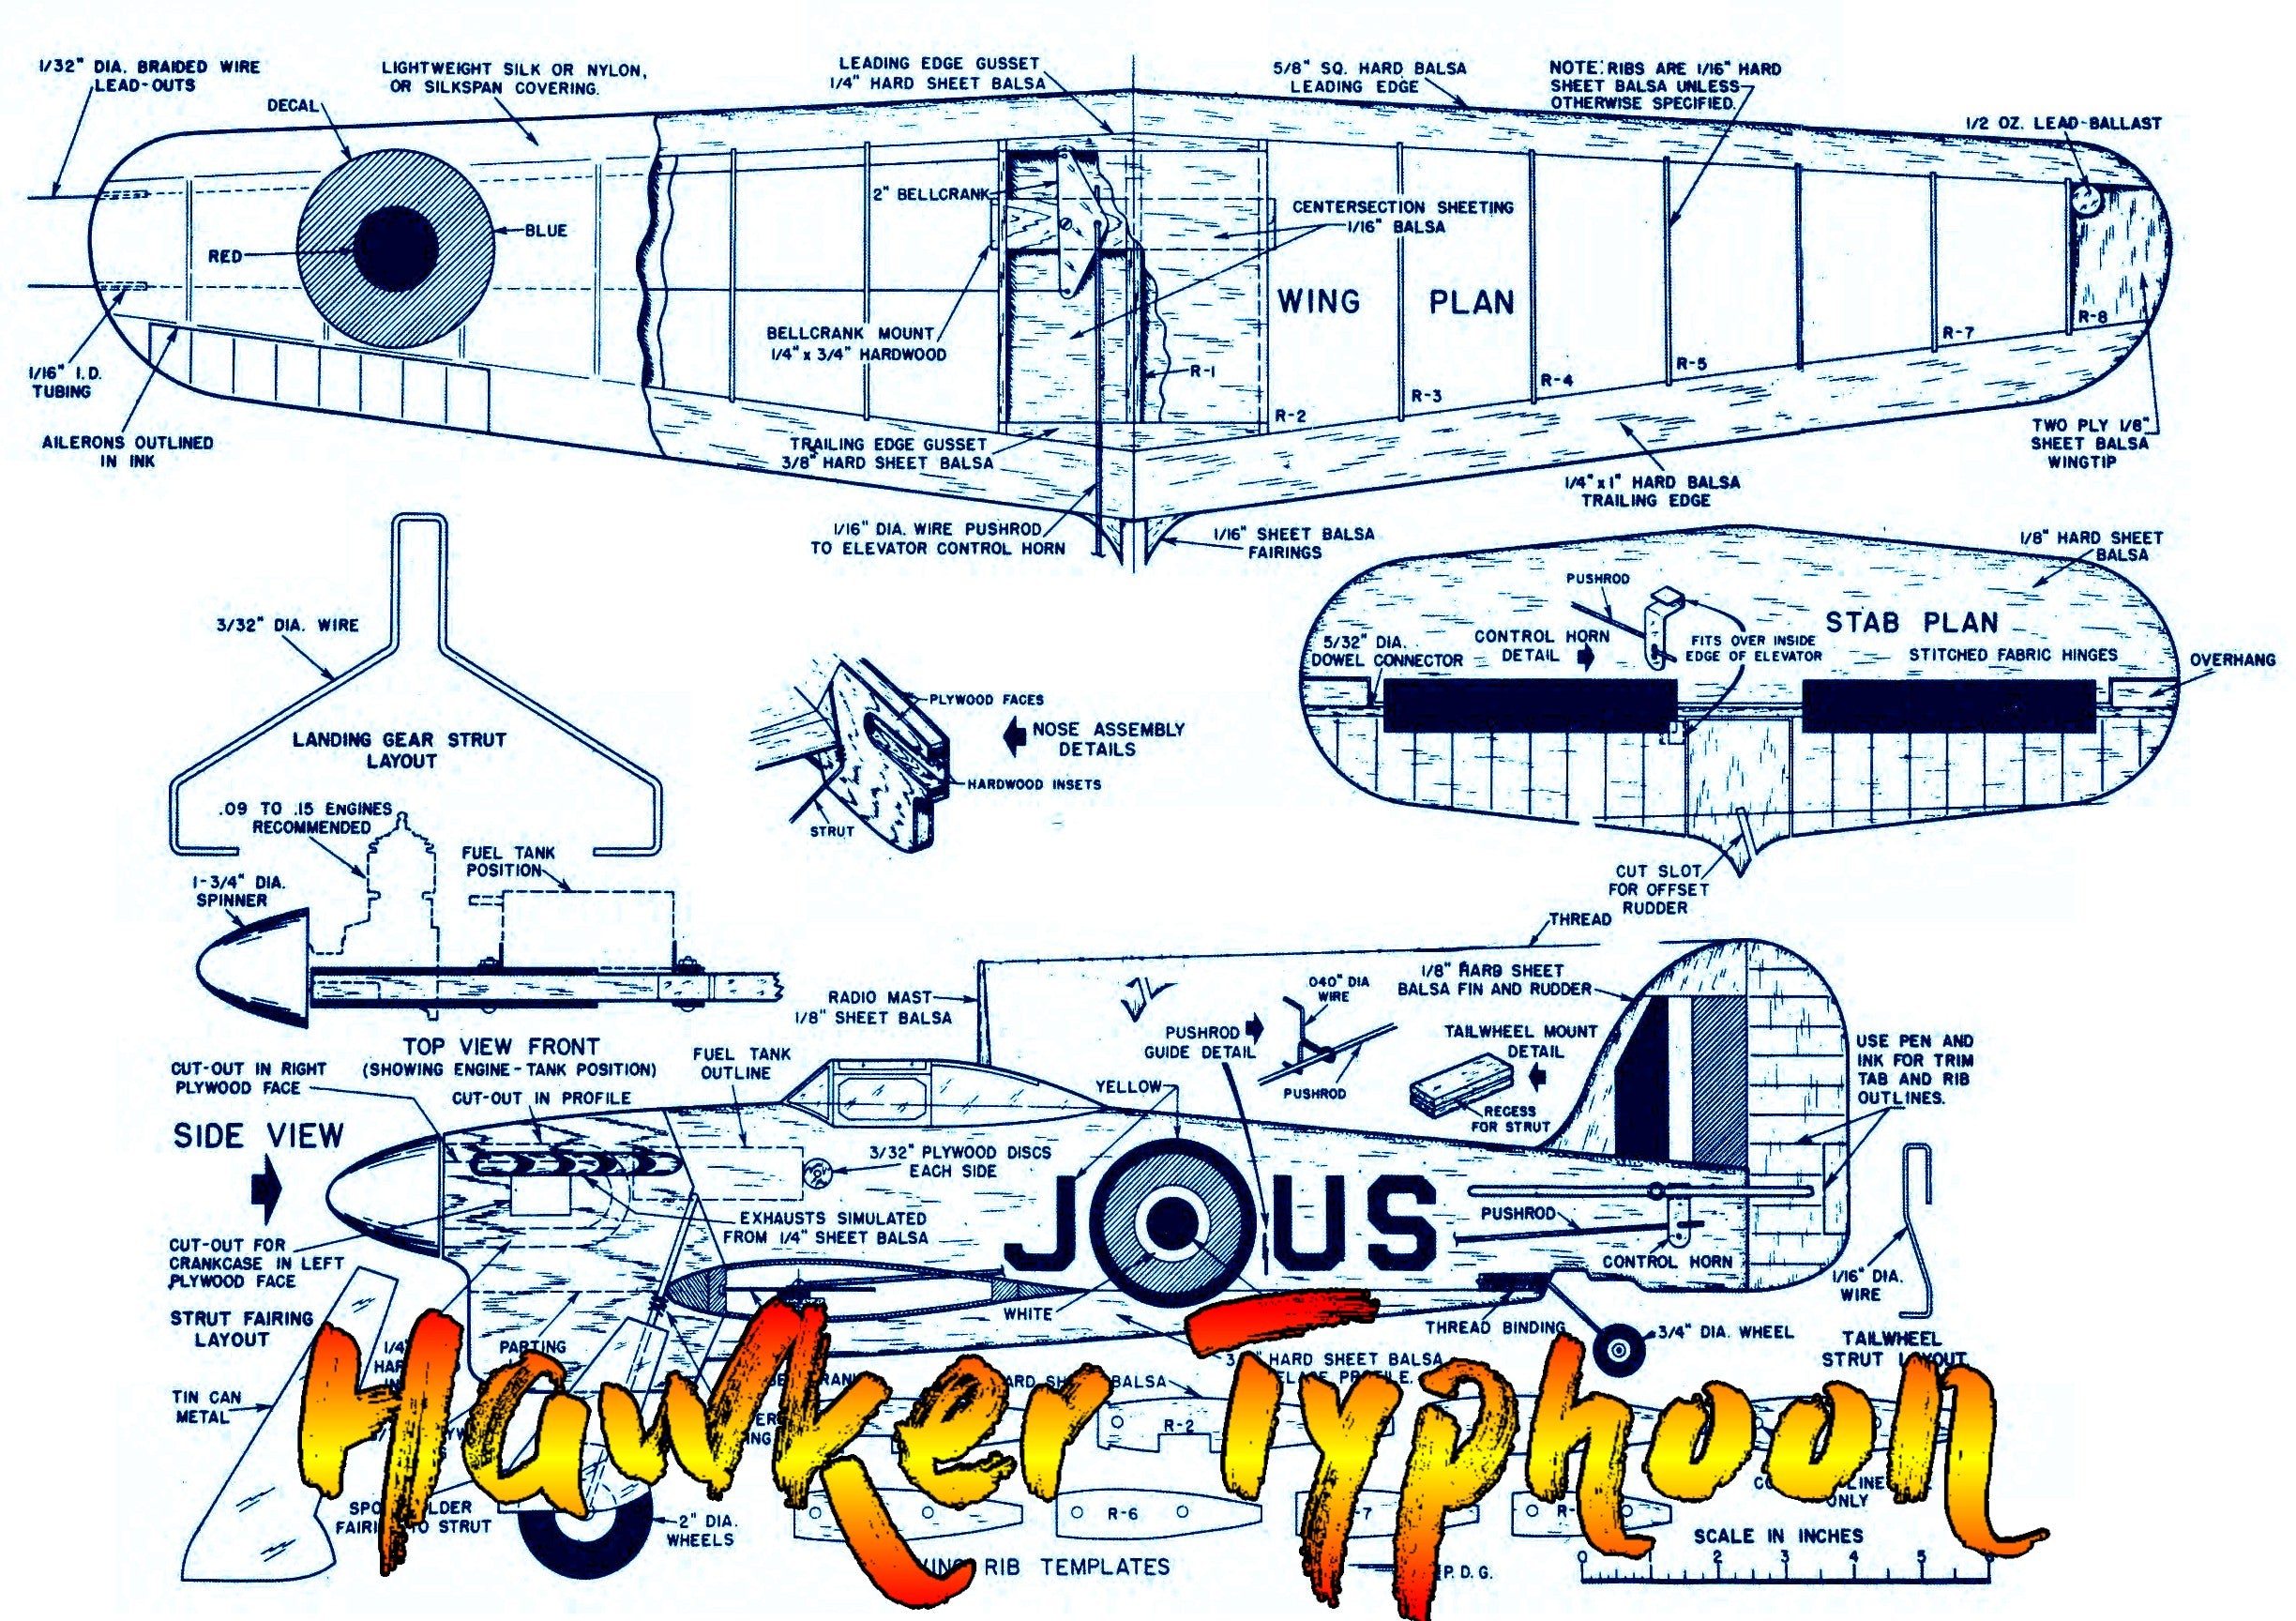 full size printed plan vintage 1957 control line combat  "hawker typhoon"  excellent performance,